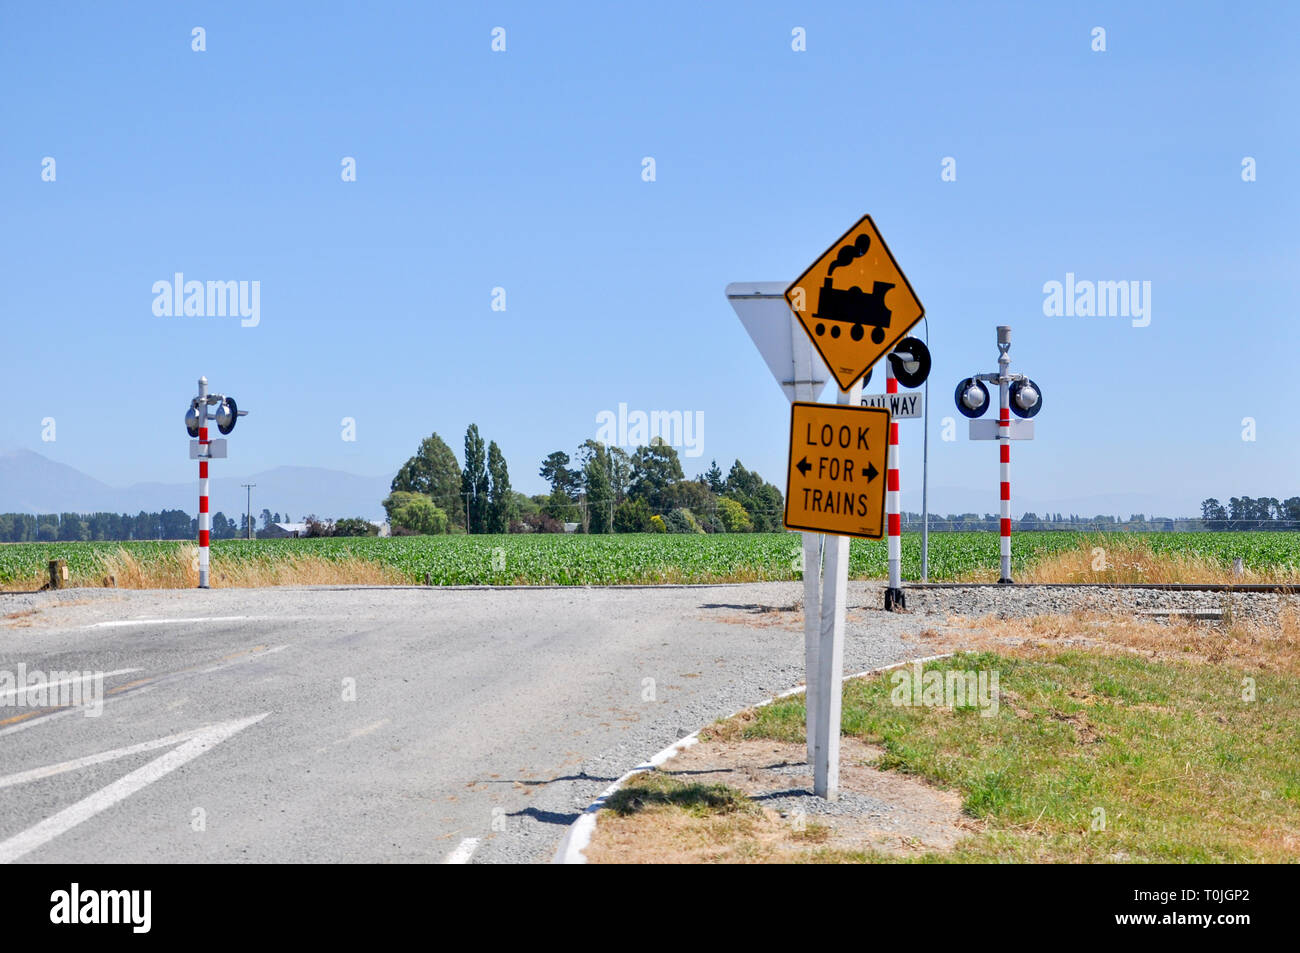 Railway crossing in the Canterbury region of New Zealand. Country crossing without gates or barrier. Look for trains sign. Steam engine graphic Stock Photo